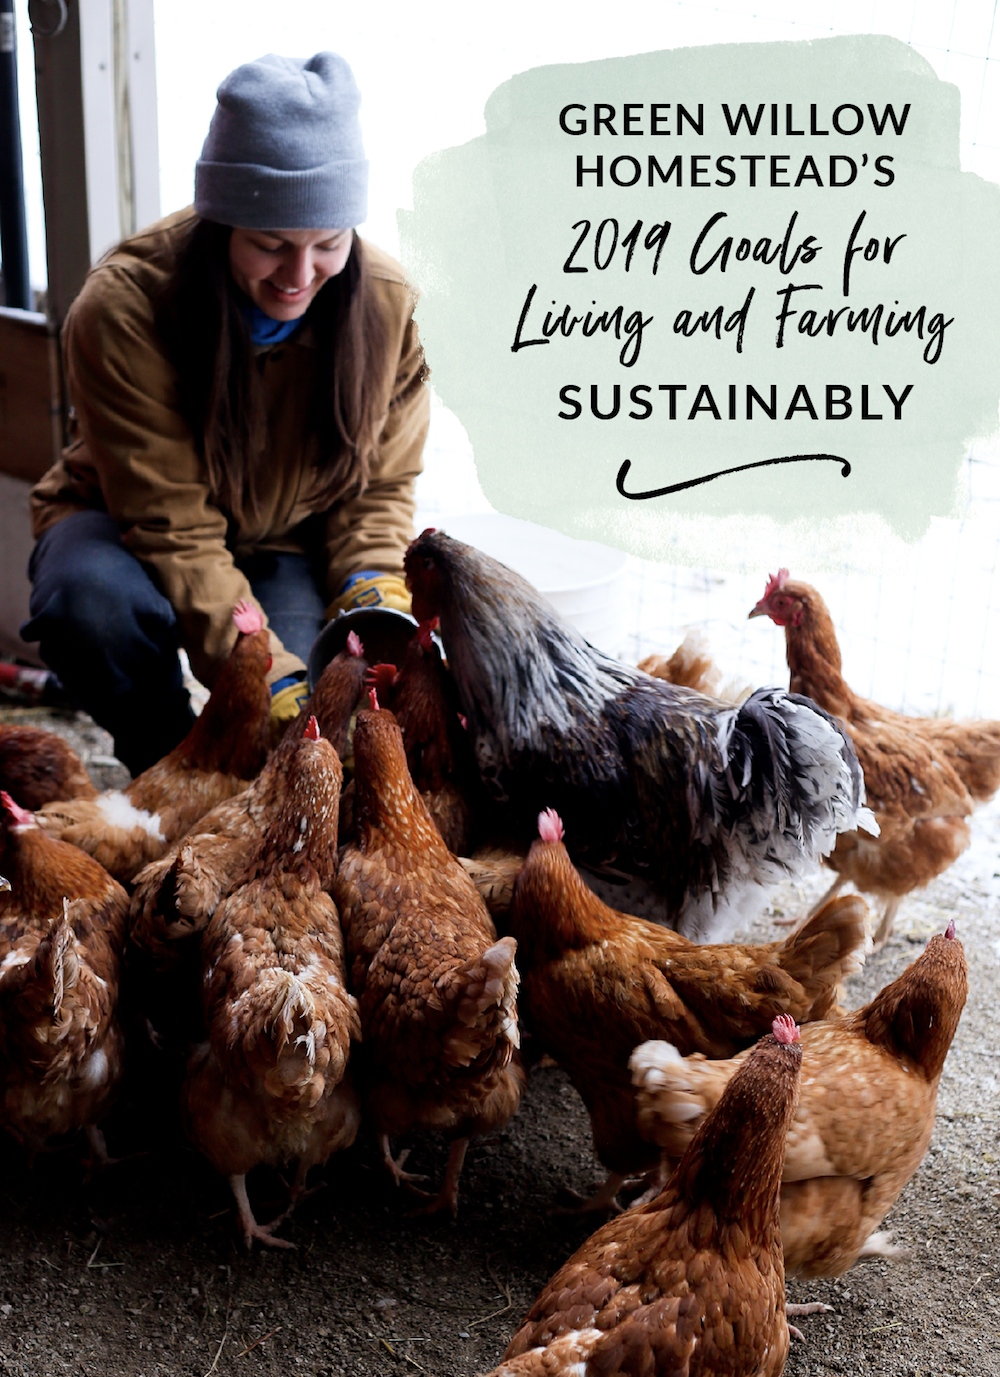 Green Willow Homestead Goals in 2019 Farming and Living Sustainably